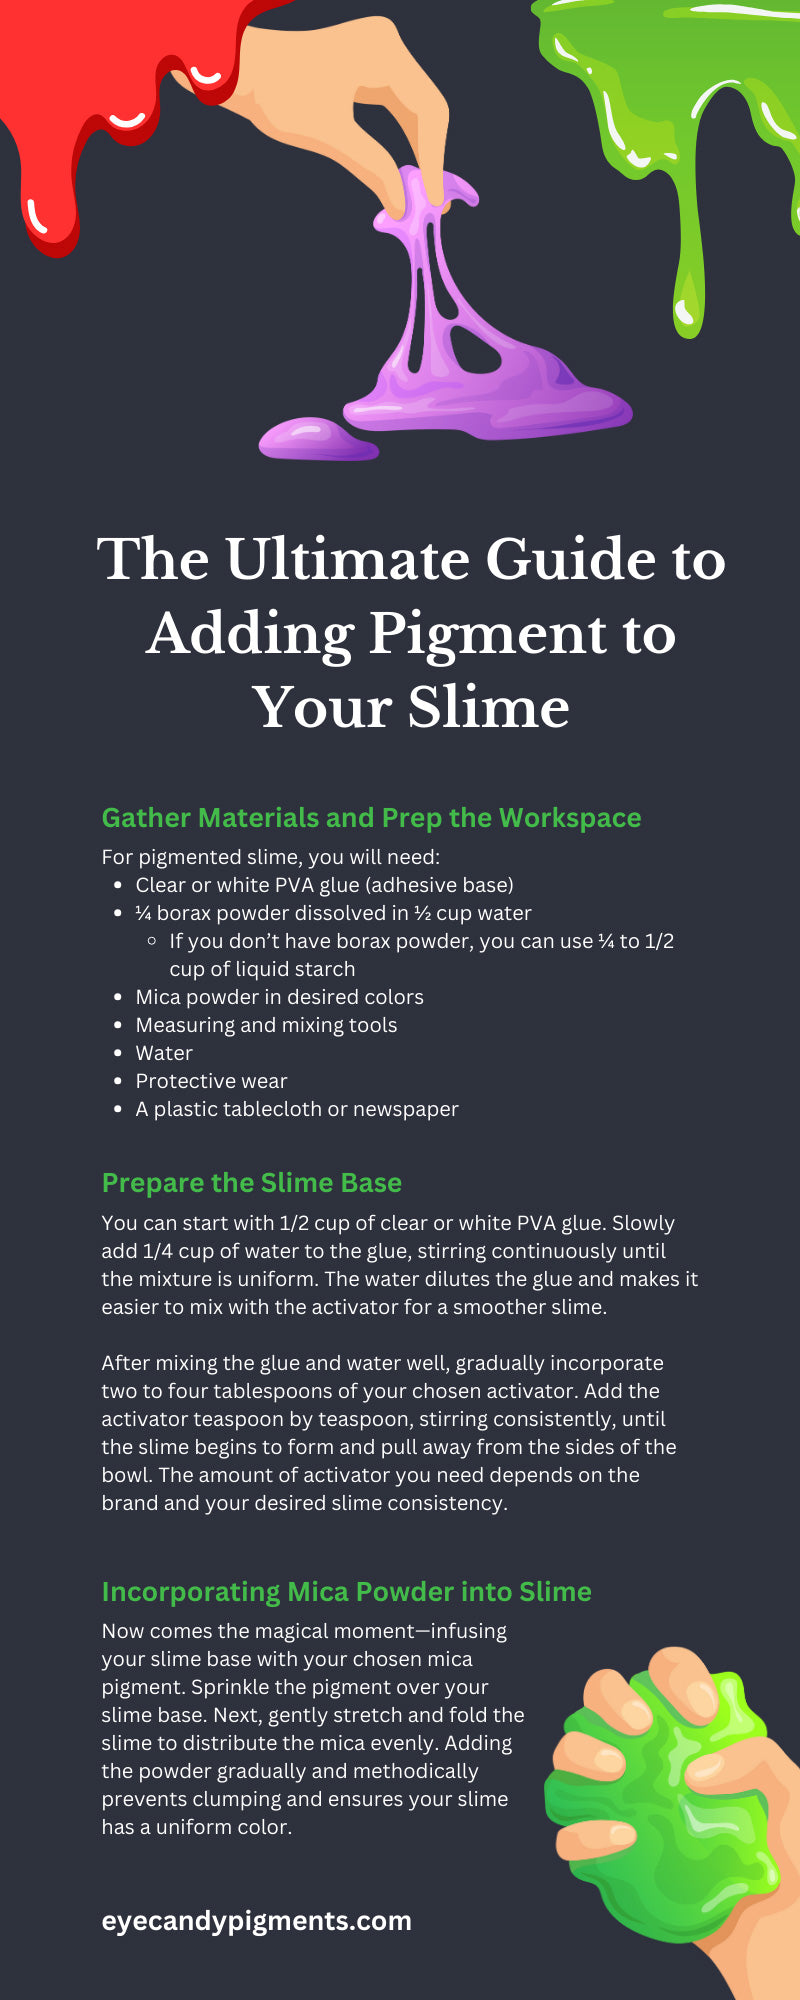 The Ultimate Guide to Adding Pigment to Your Slime